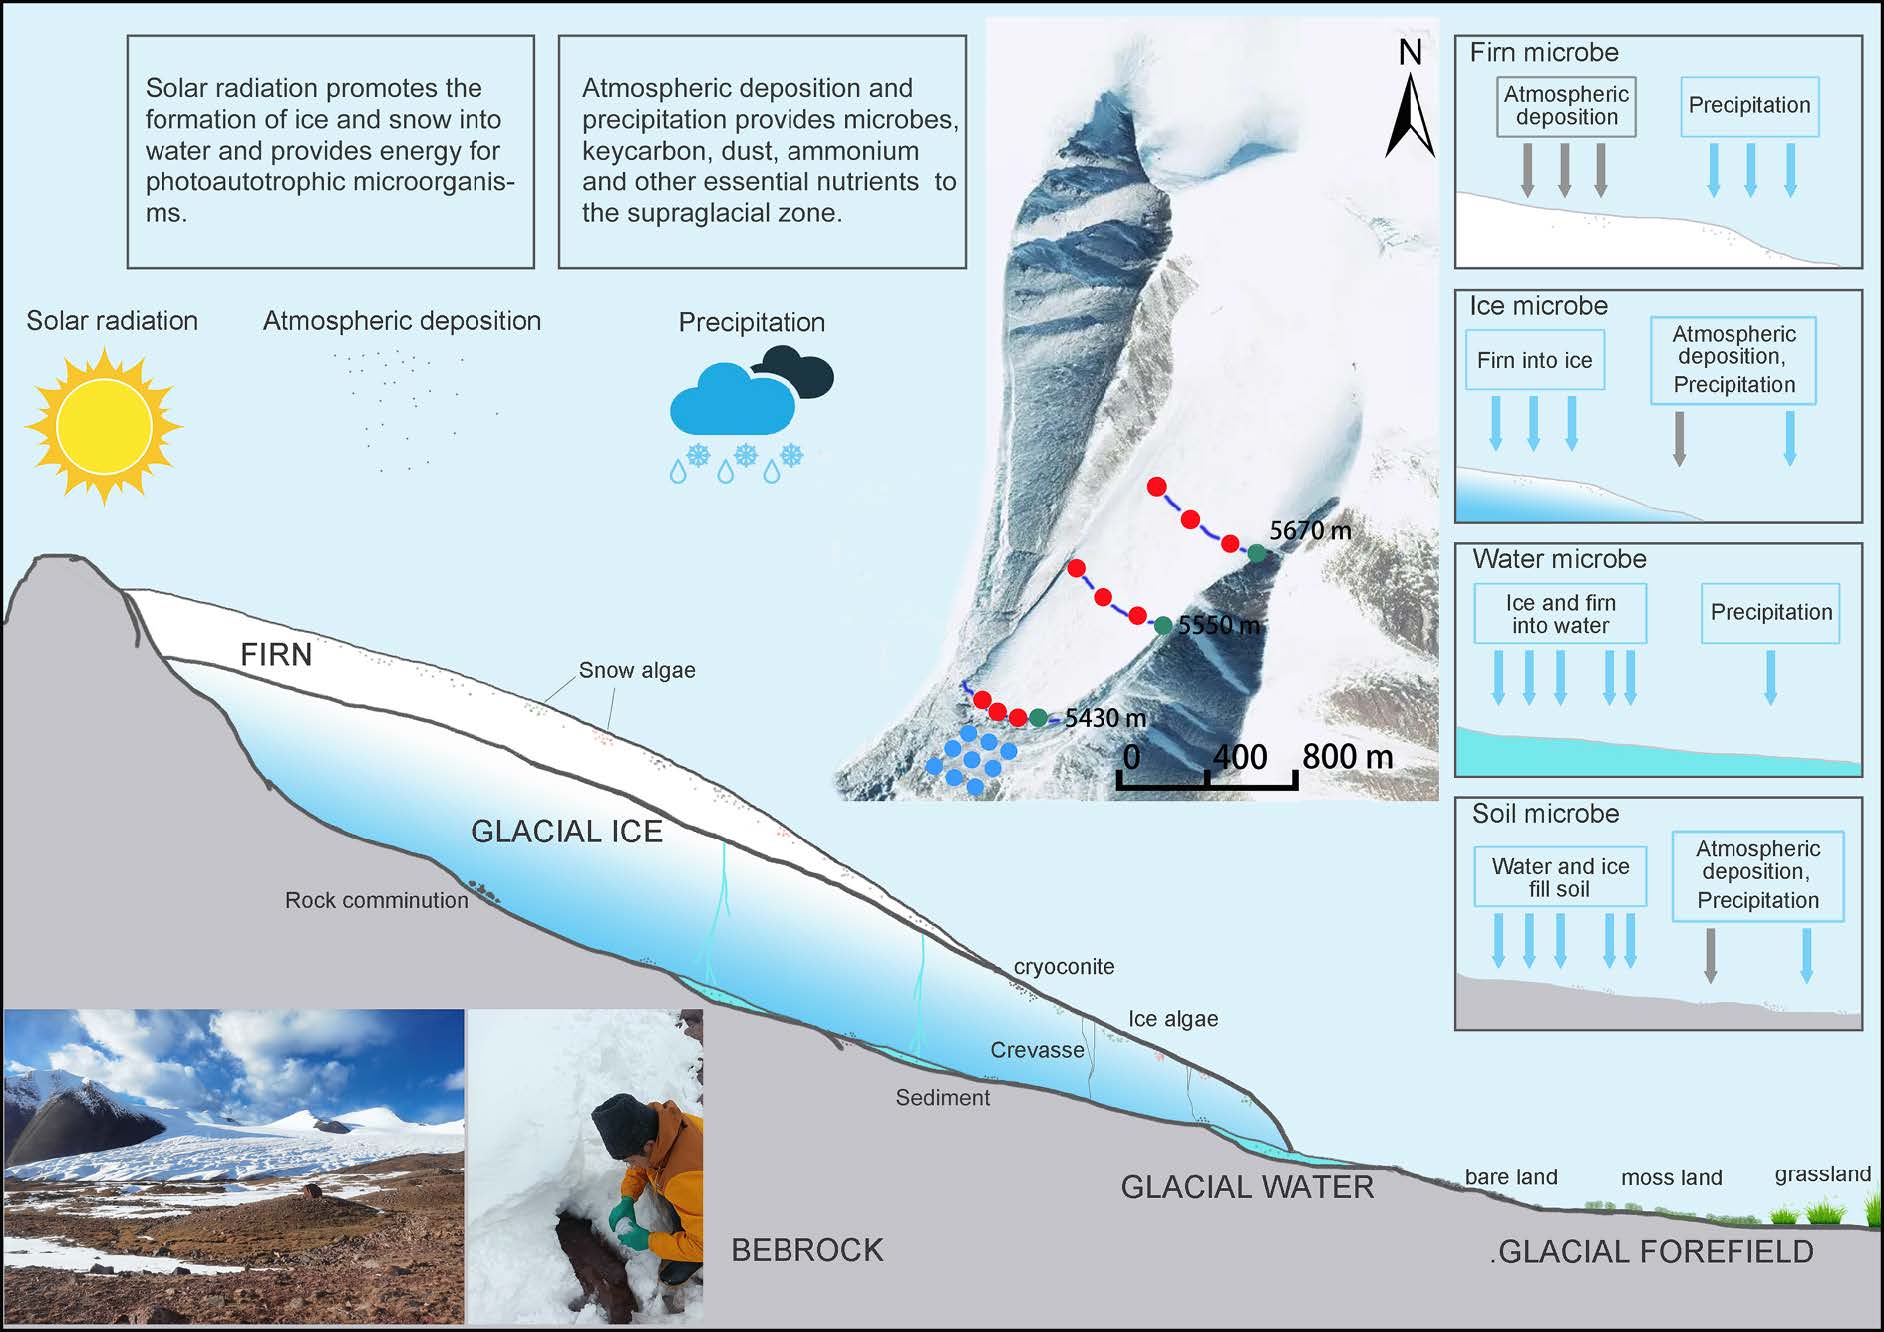 Glaciers Freezing and Melting Reshape Diversity and Structure of Glacier Microbial Communities